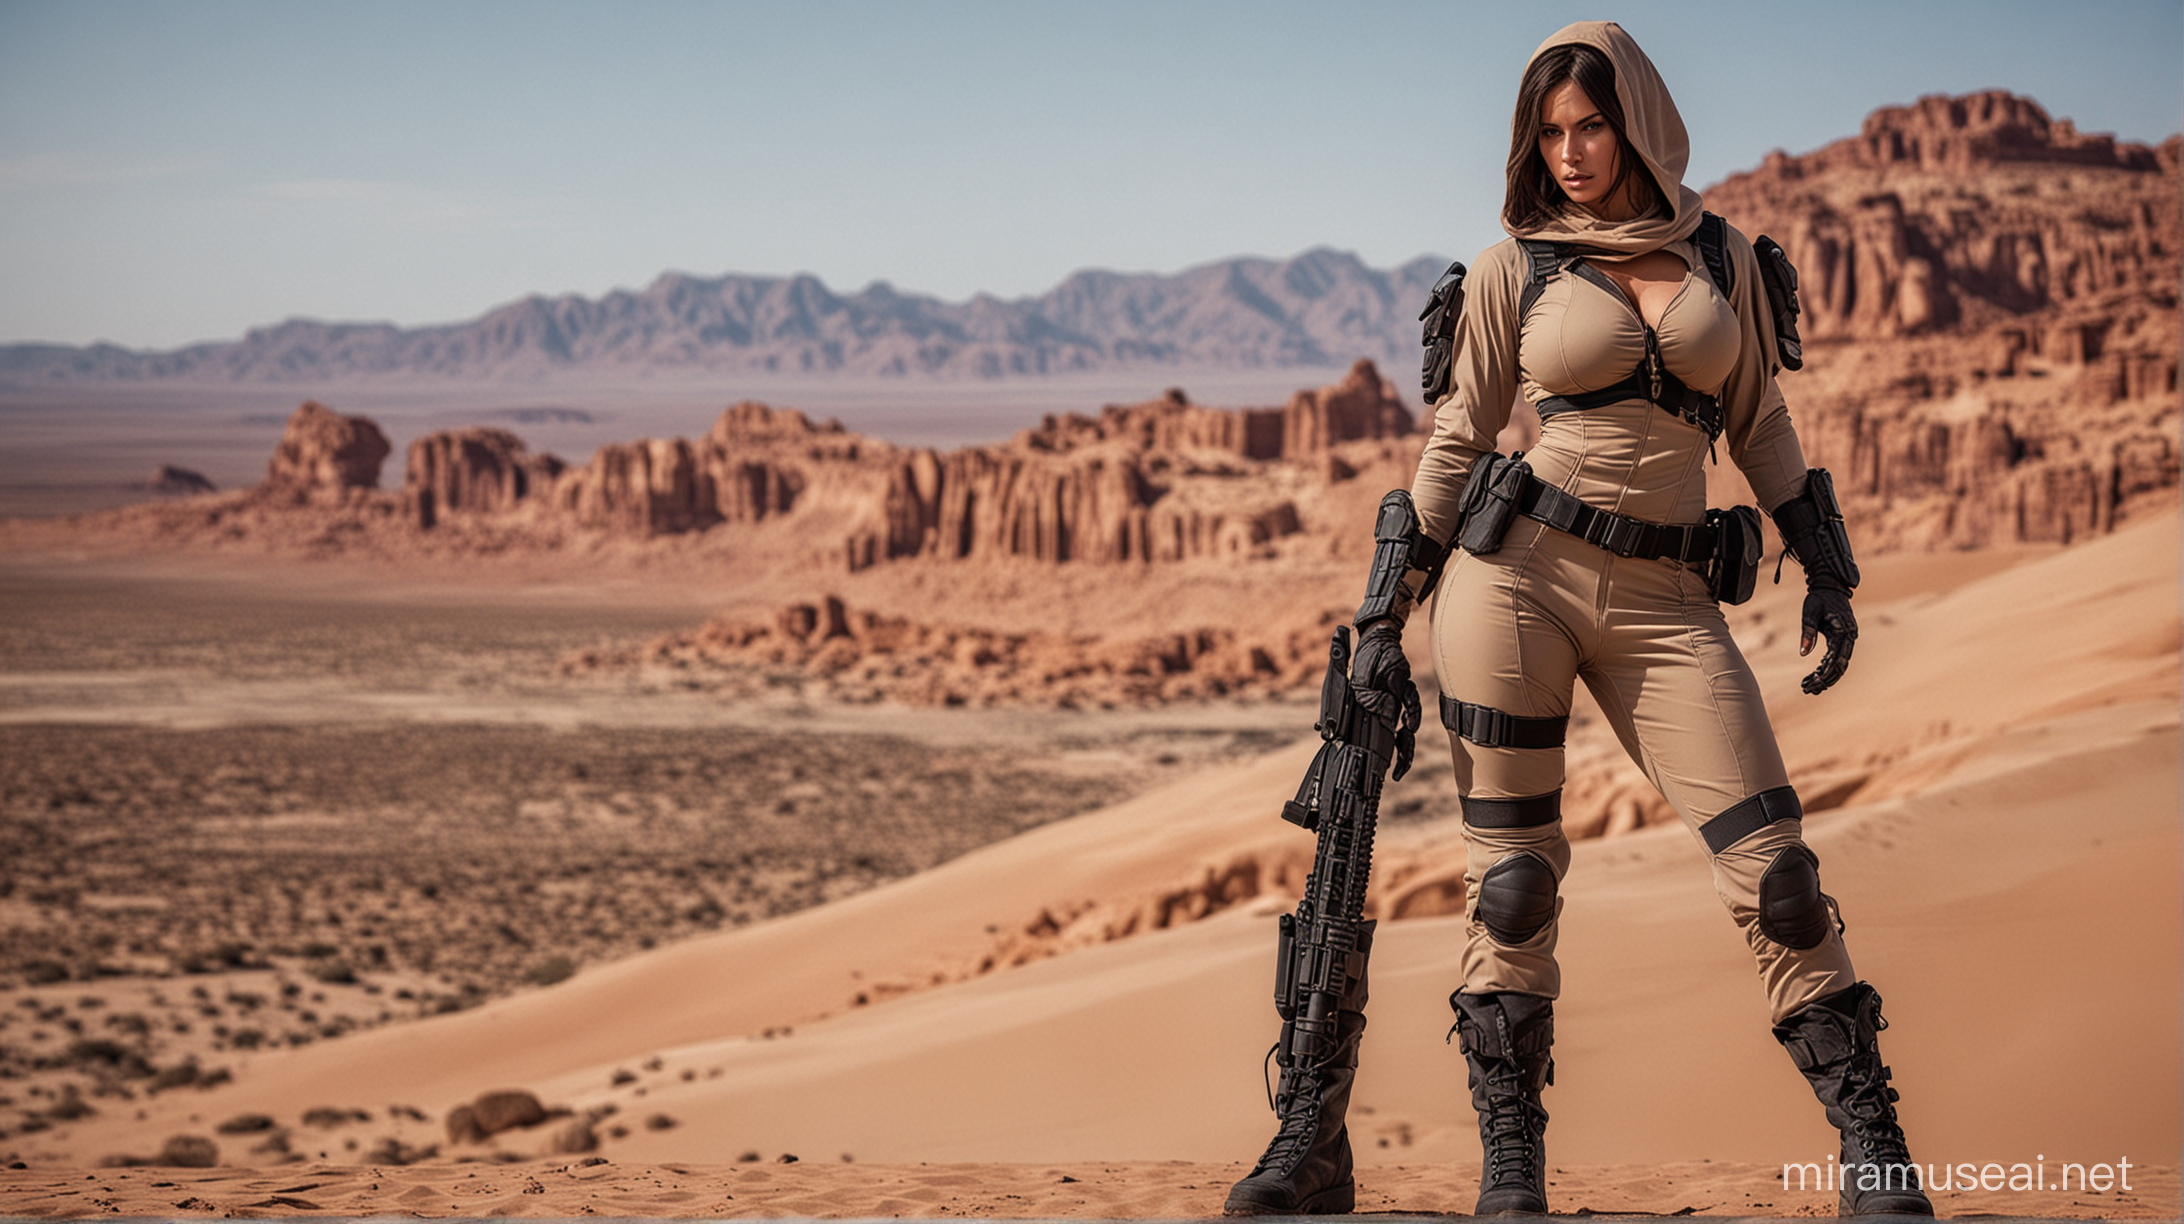 Sultry Nomad Woman in Tactical Desert Attire